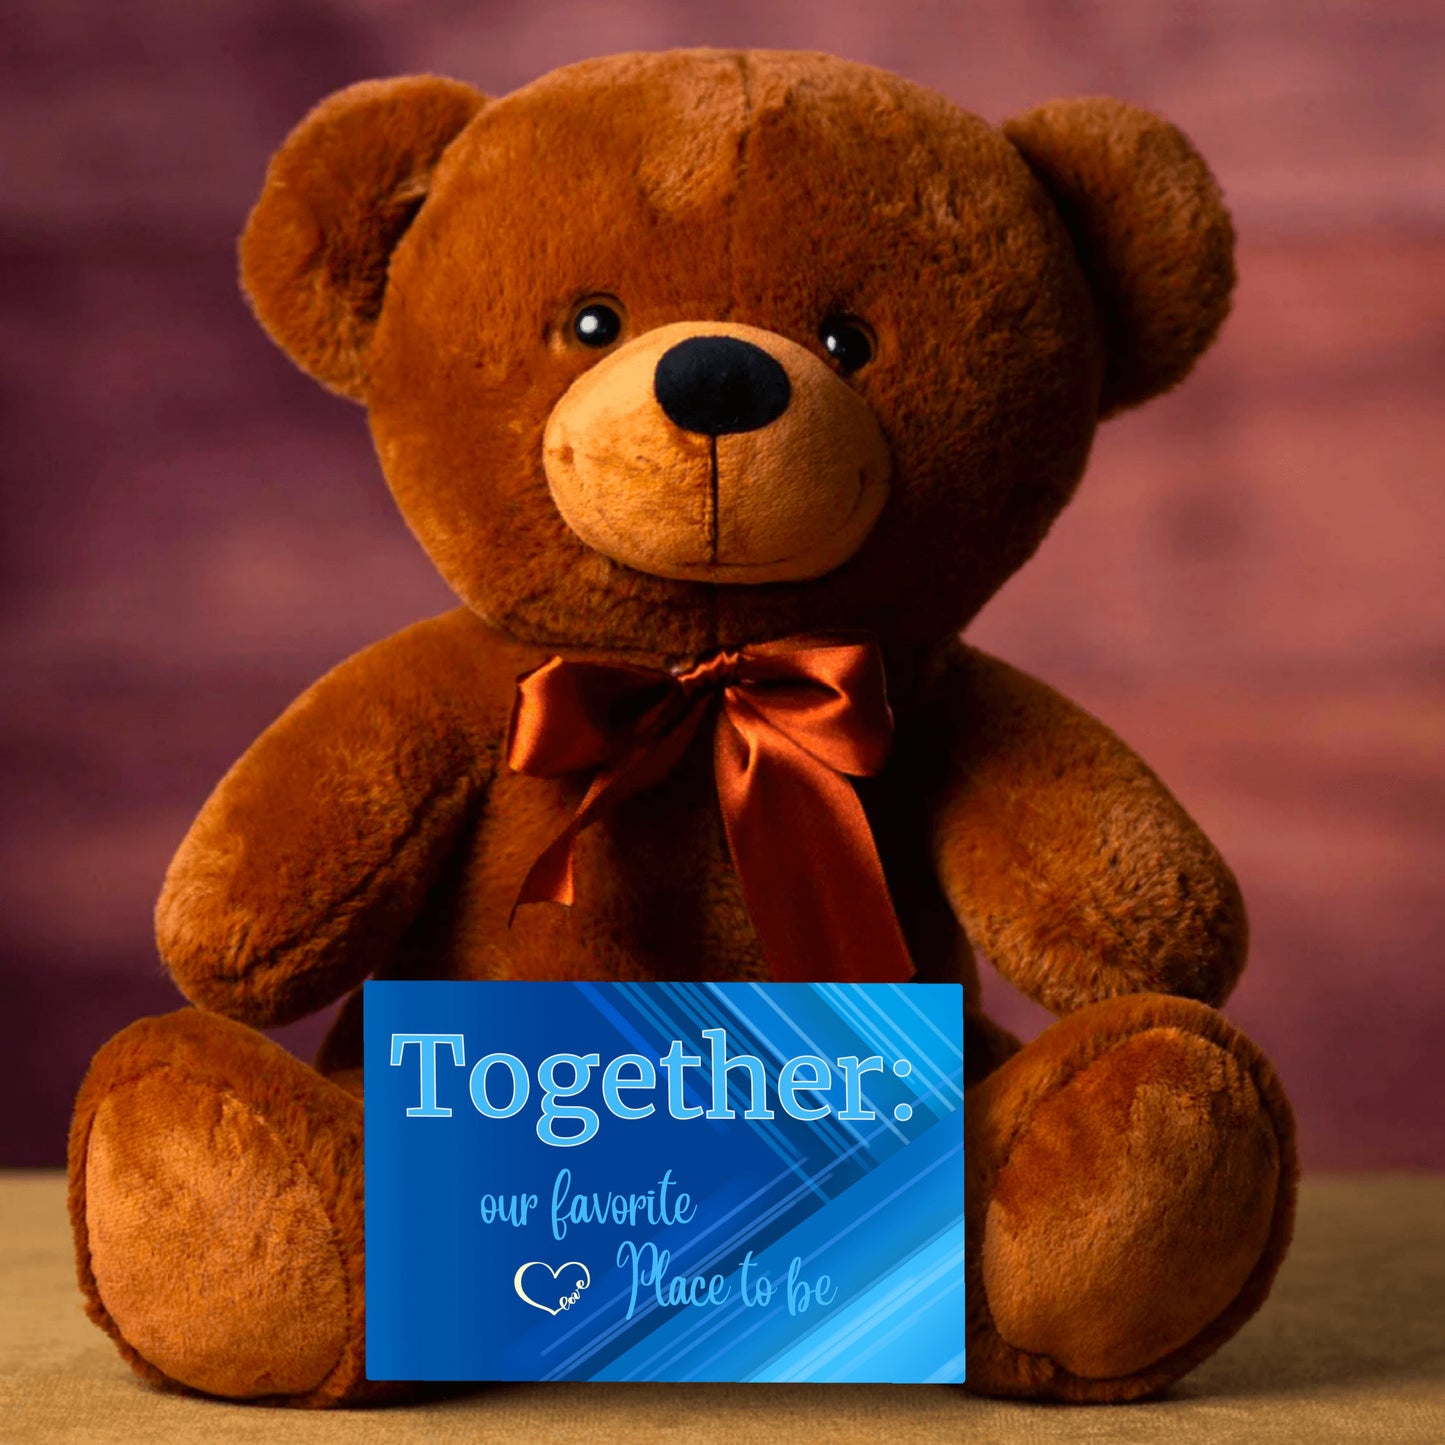 Together: our favorite place to be - teddy bear, Gift, Valentine's, Anniversary